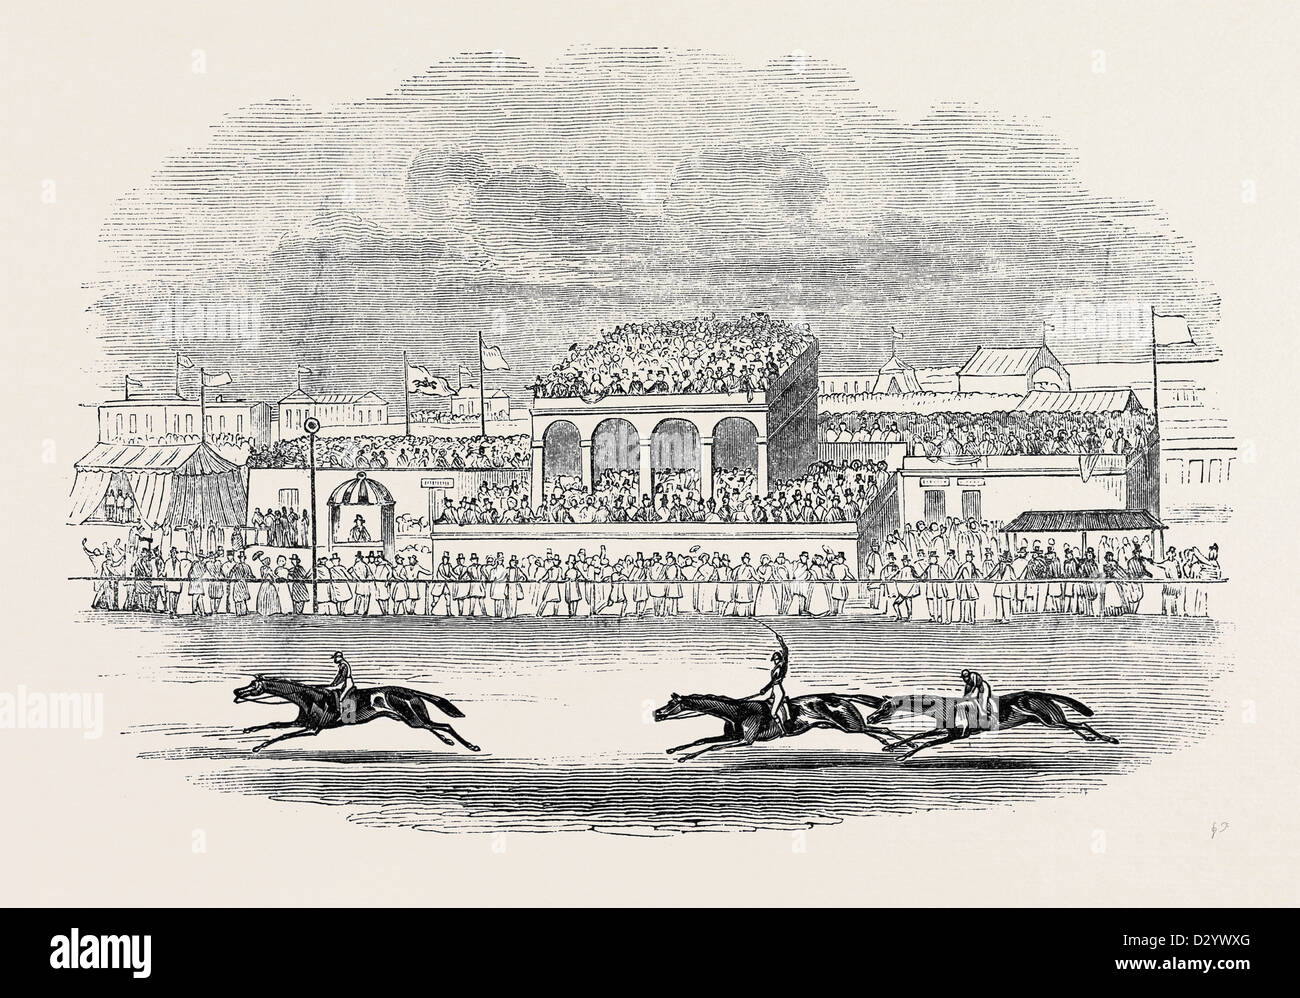 CHESTER RACES, 'RED DEER' WINNING THE CHESTER CUP, FROM A SKETCH MADE ON THE SPOT Stock Photo